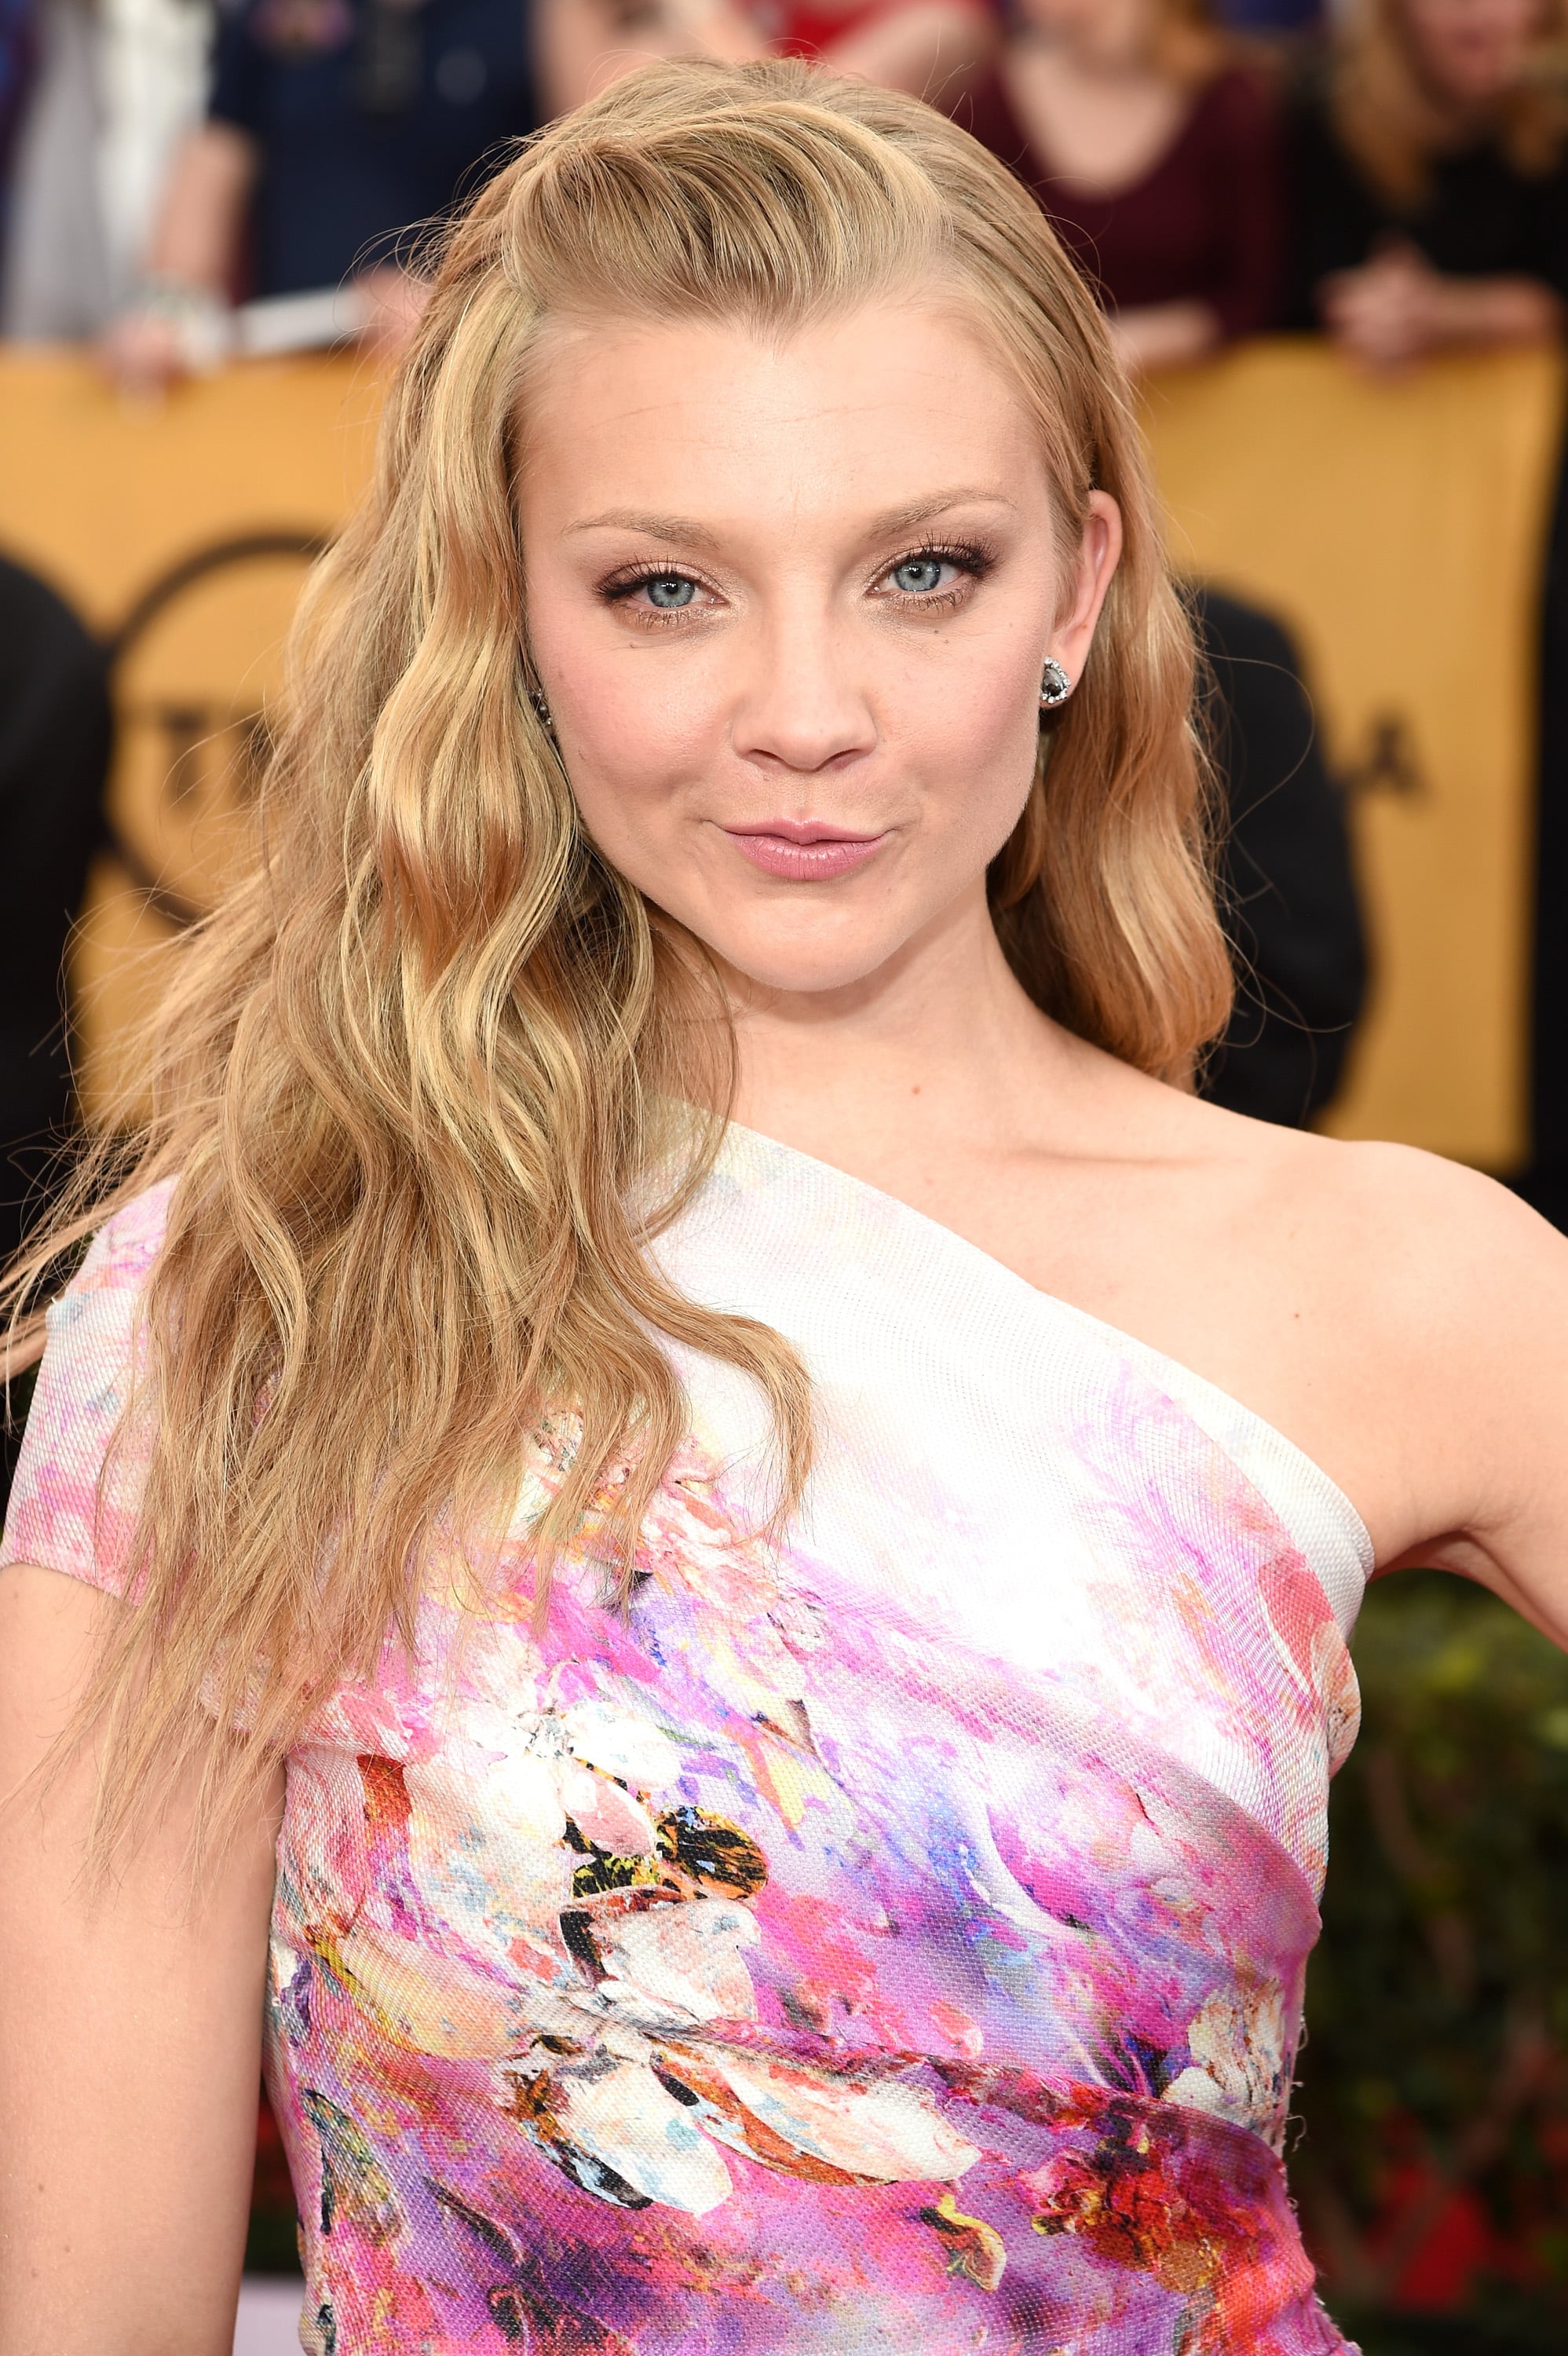 natalie dormer margaery tyrell the game of thrones cast mingled with famous faces at the sag awards popsugar celebrity photo 17